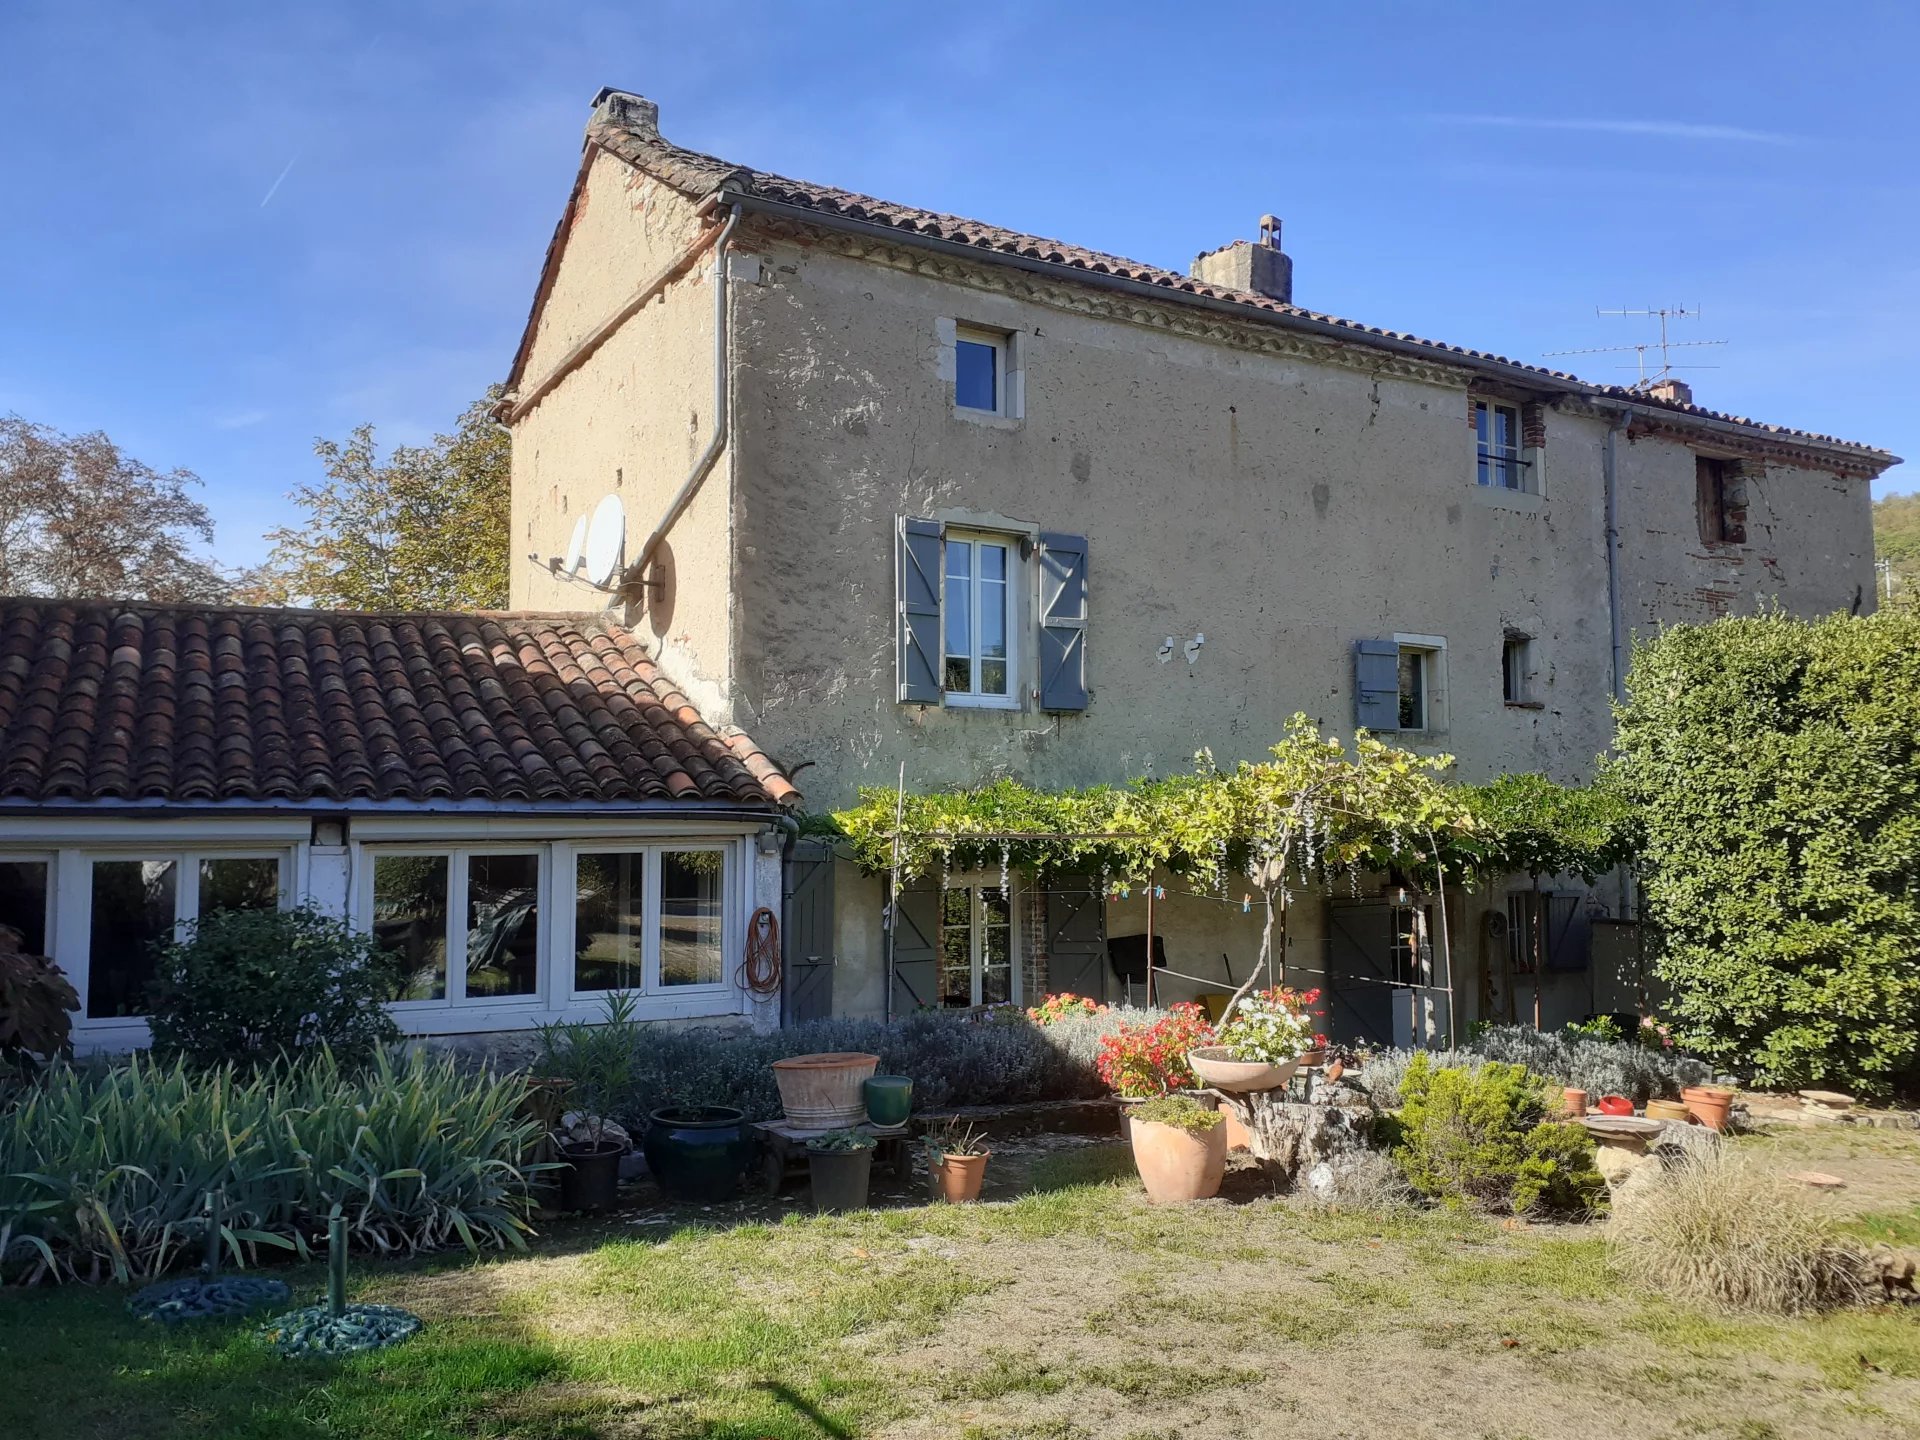 5-bedroom 19th century house in a beautiful medieval village